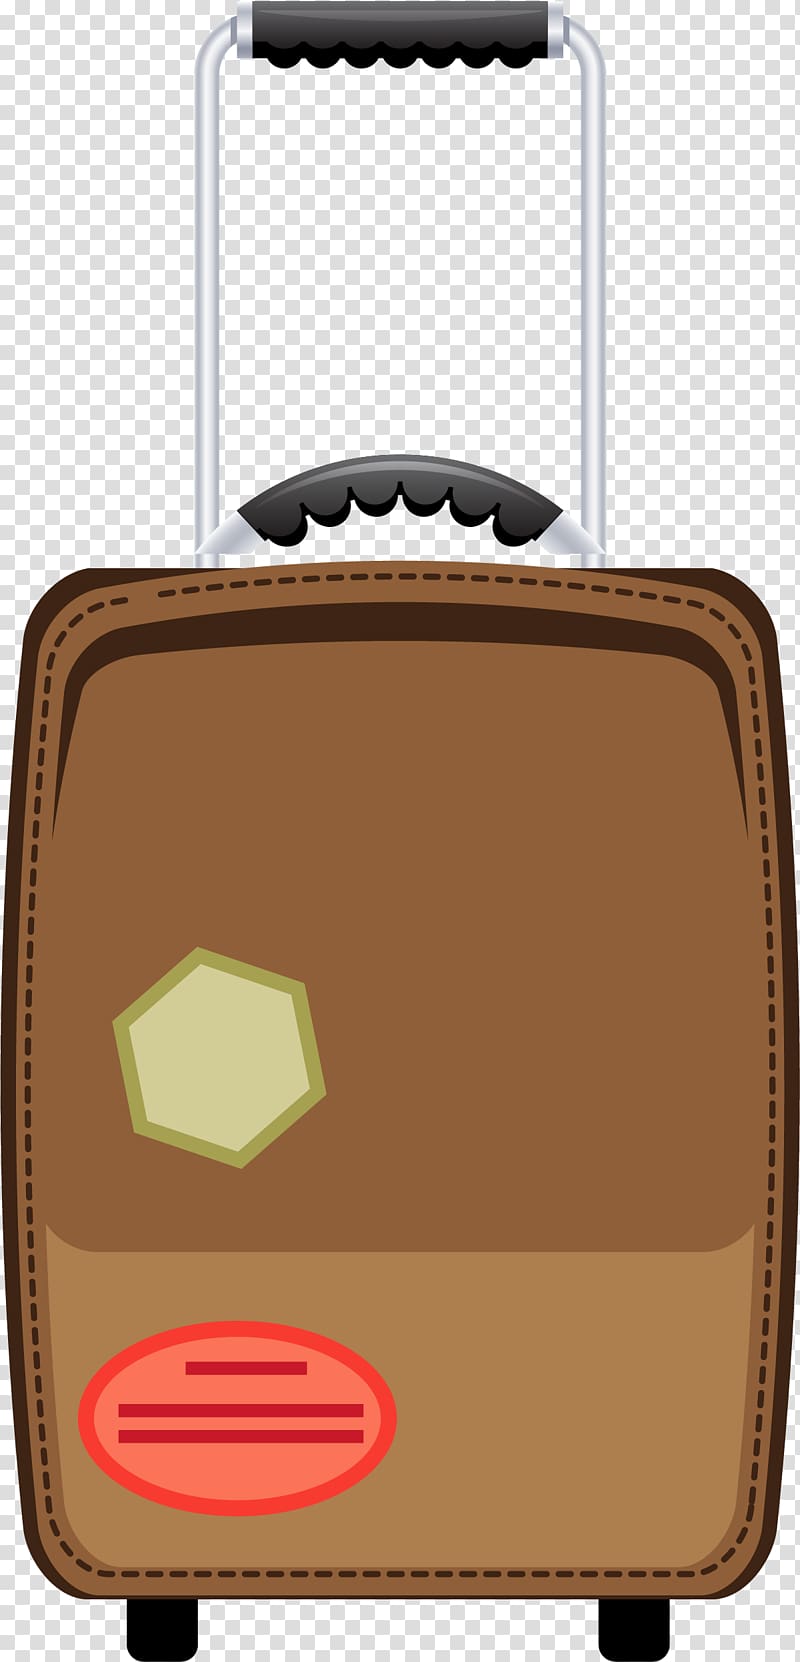 Guilin Suitcase Travel Baggage, Brown tie box transparent background PNG clipart